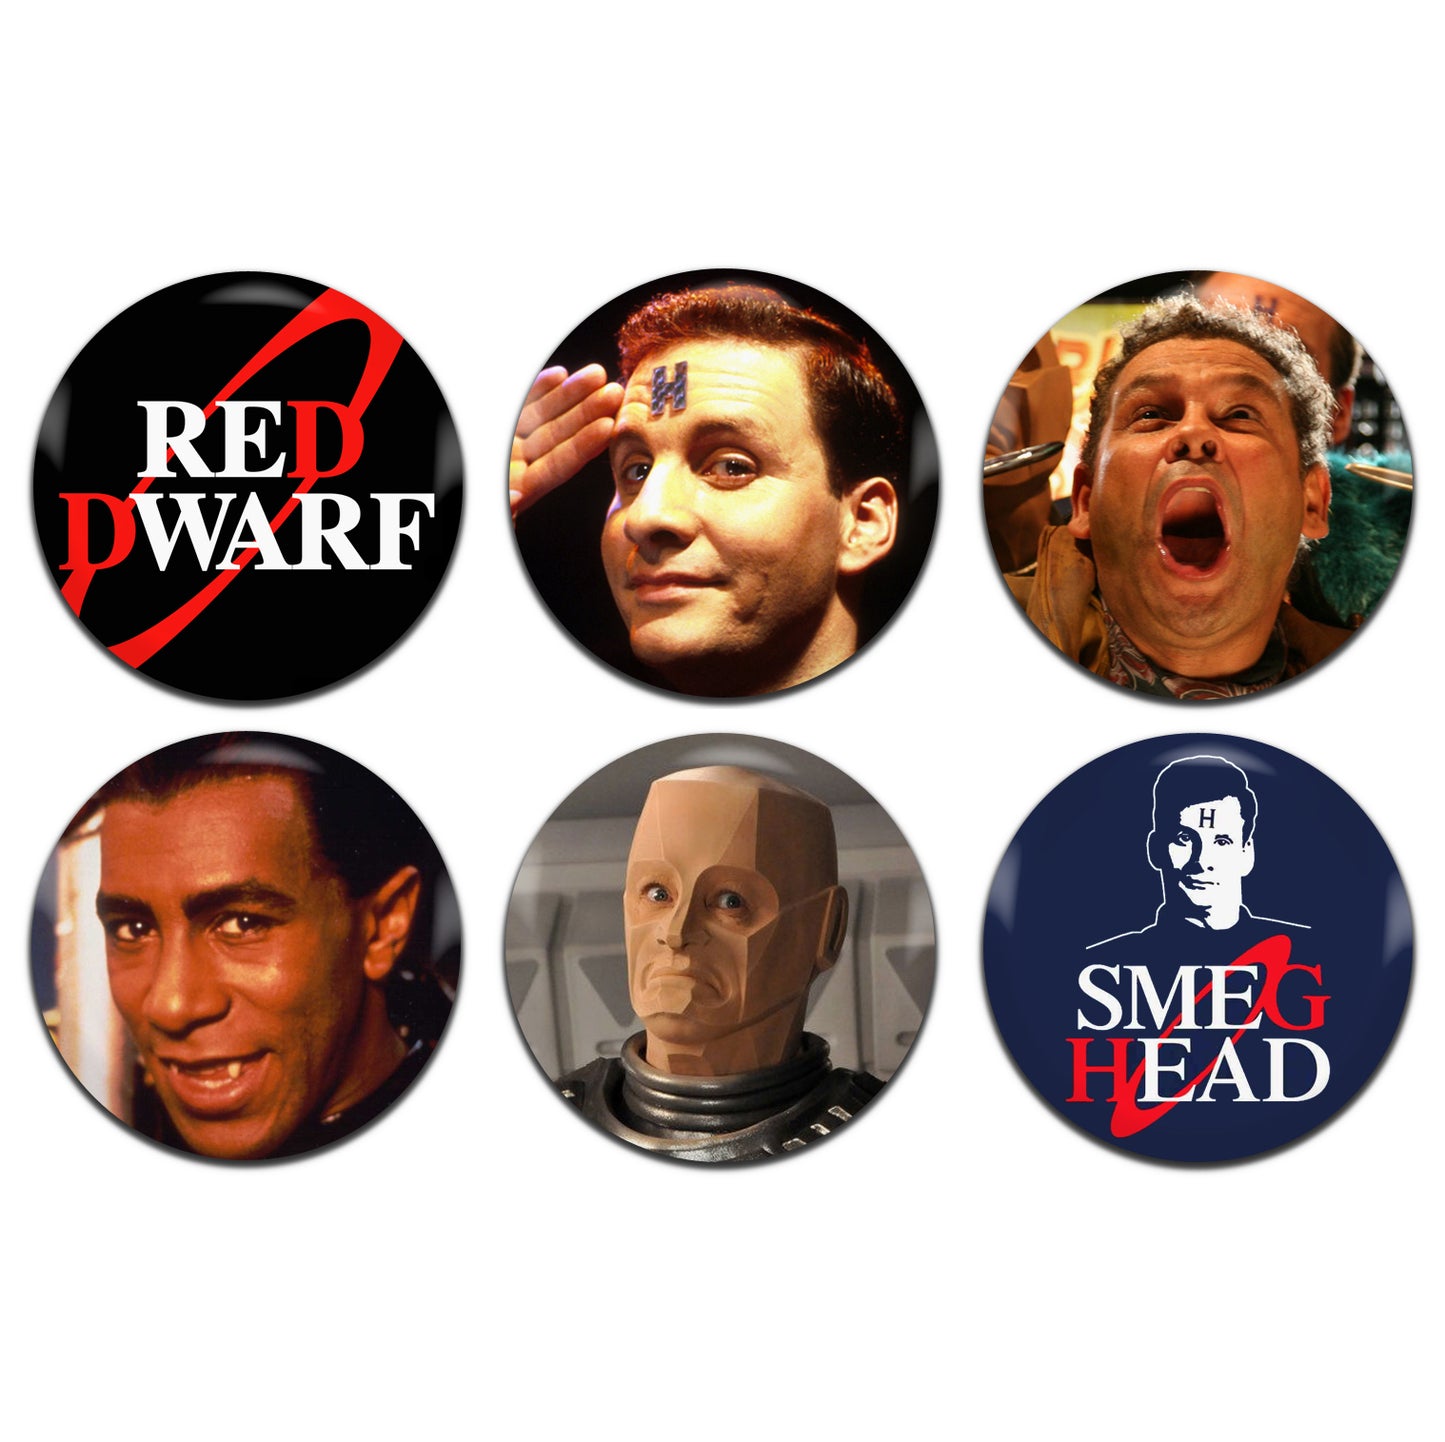 Red Dwarf TV Comedy 90's 25mm / 1 Inch D-Pin Button Badges (6x Set)